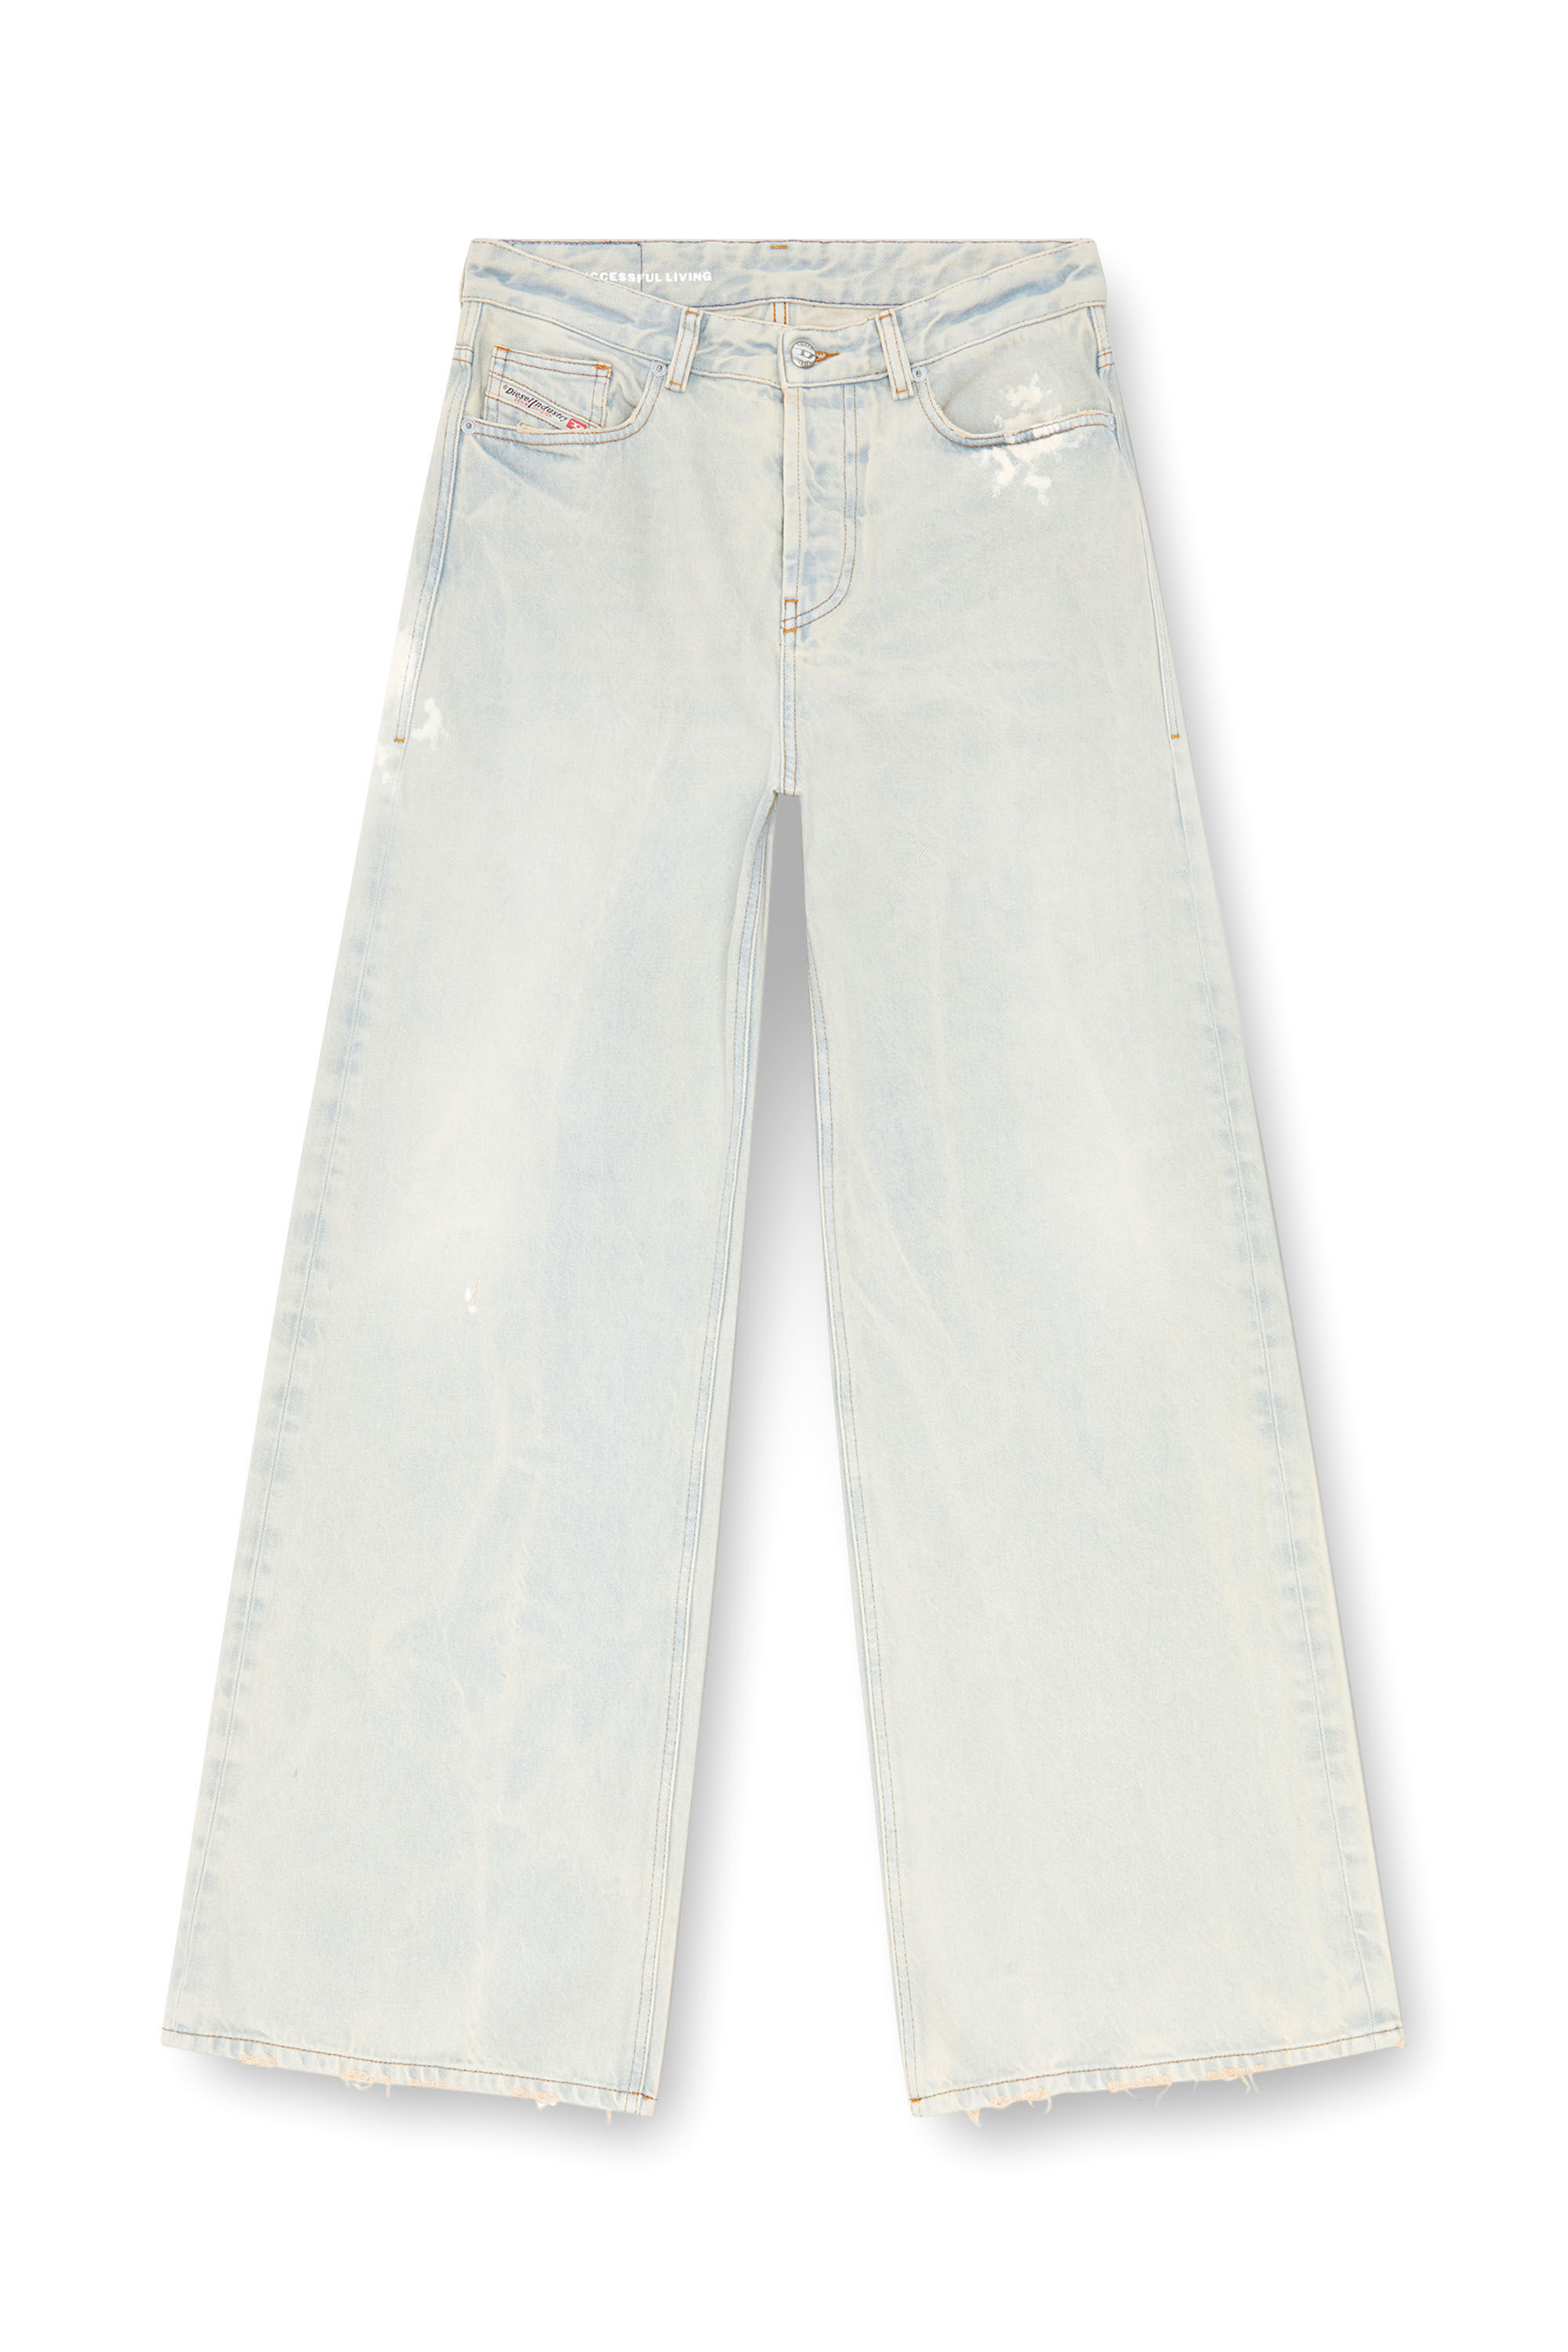 Diesel - Straight Jeans 1996 D-Sire 09J81, Mujer Straight Jeans - 1996 D-Sire in Azul marino - Image 2